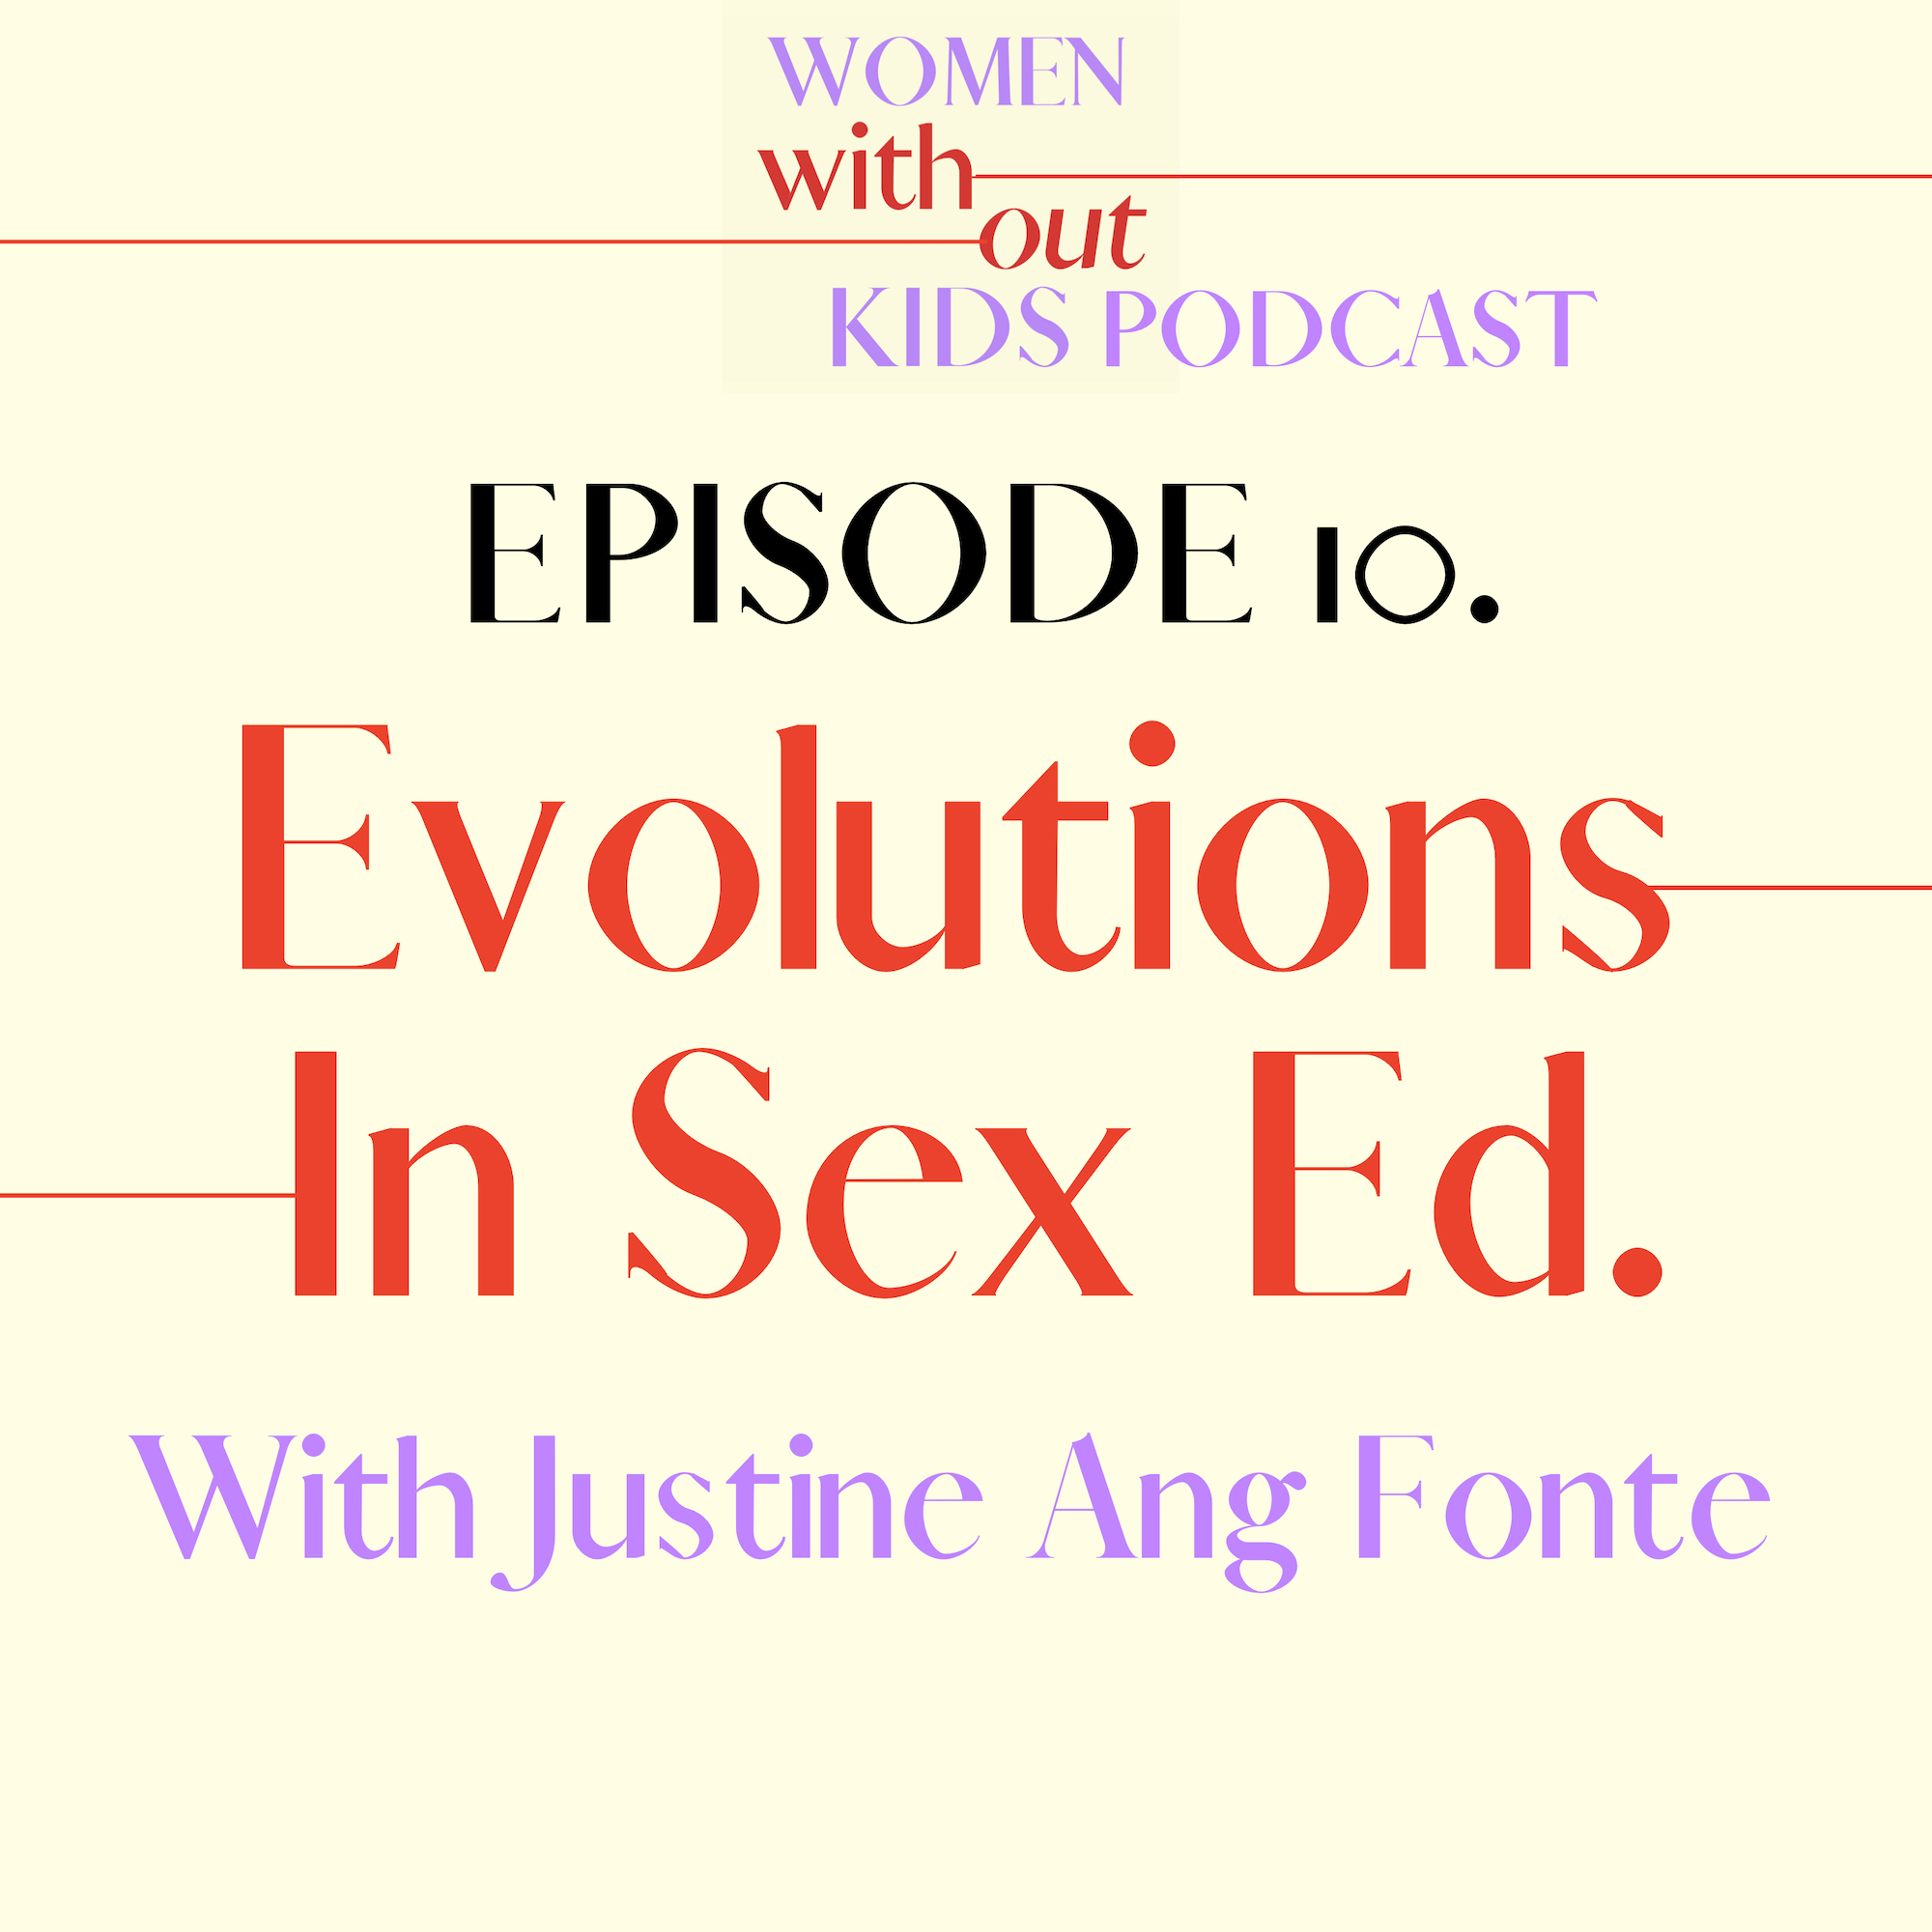 Justine Ang Fonte Women Without Kids podcast sexuality educator ruby warrington